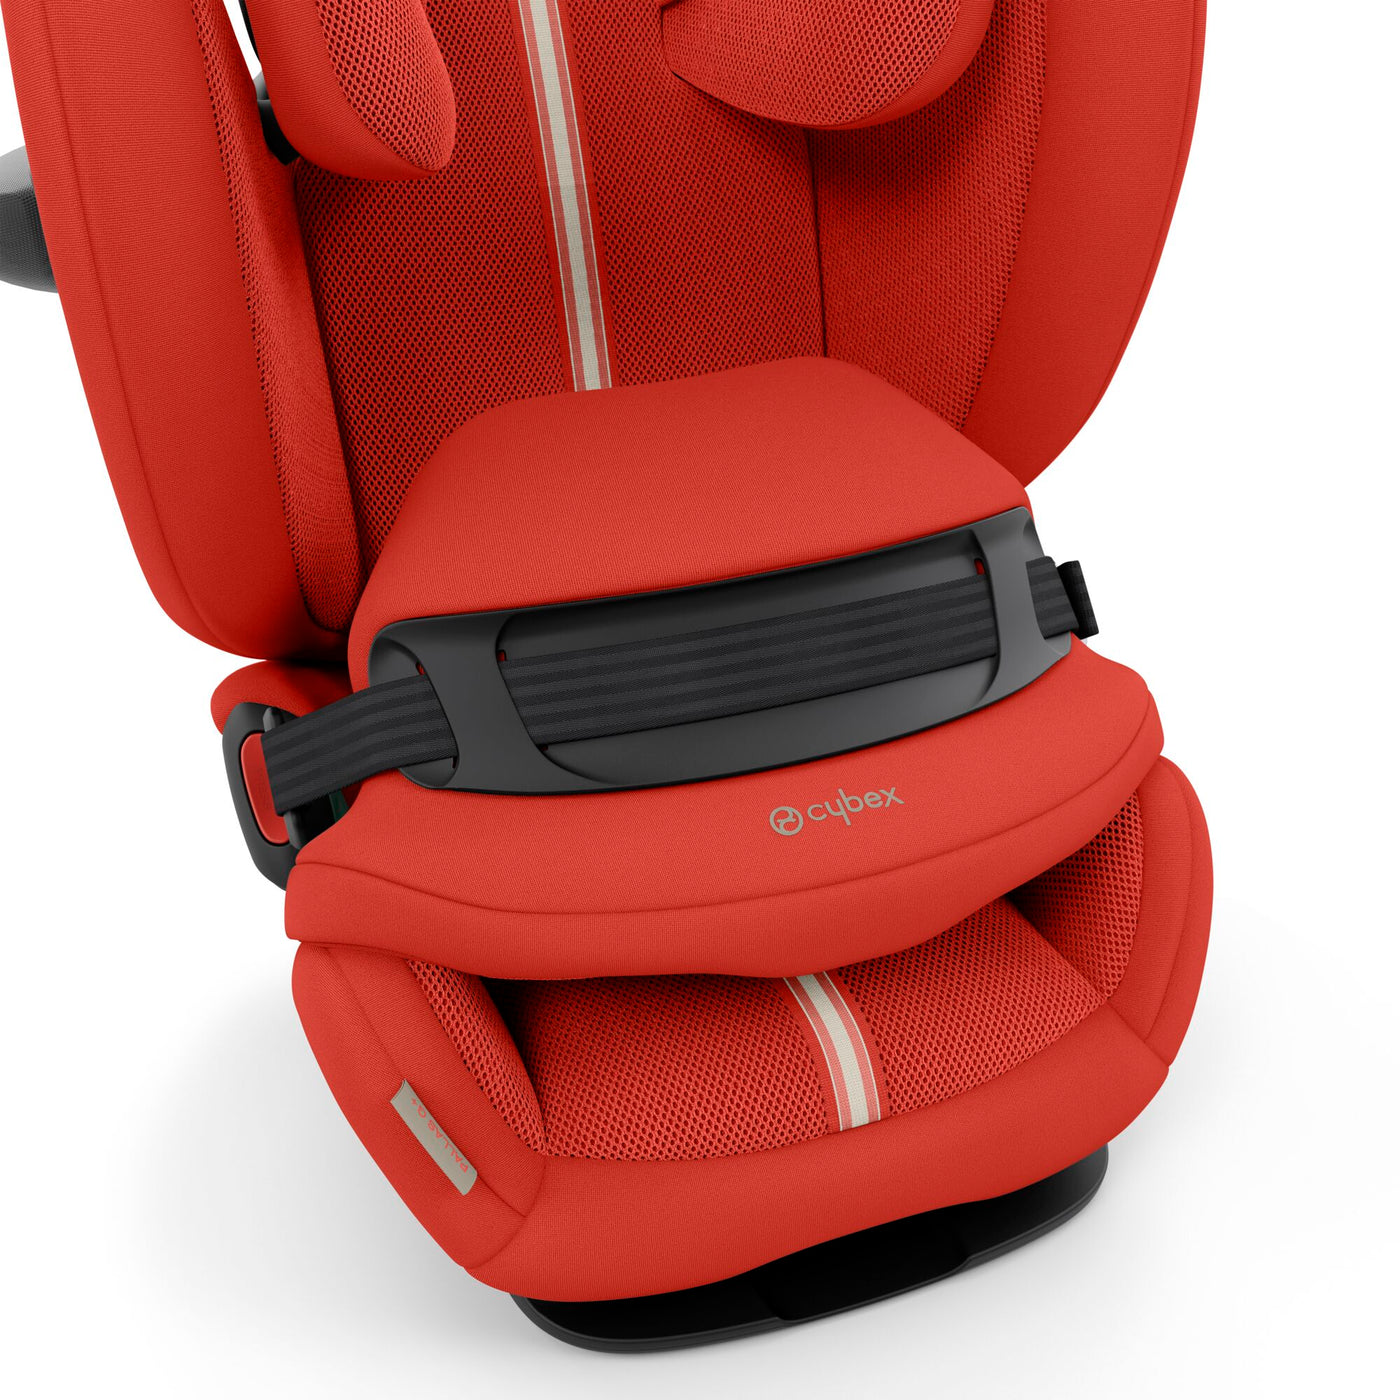 Cybex Pallas G i-Size Car Seat PLUS - Hibiscus Red